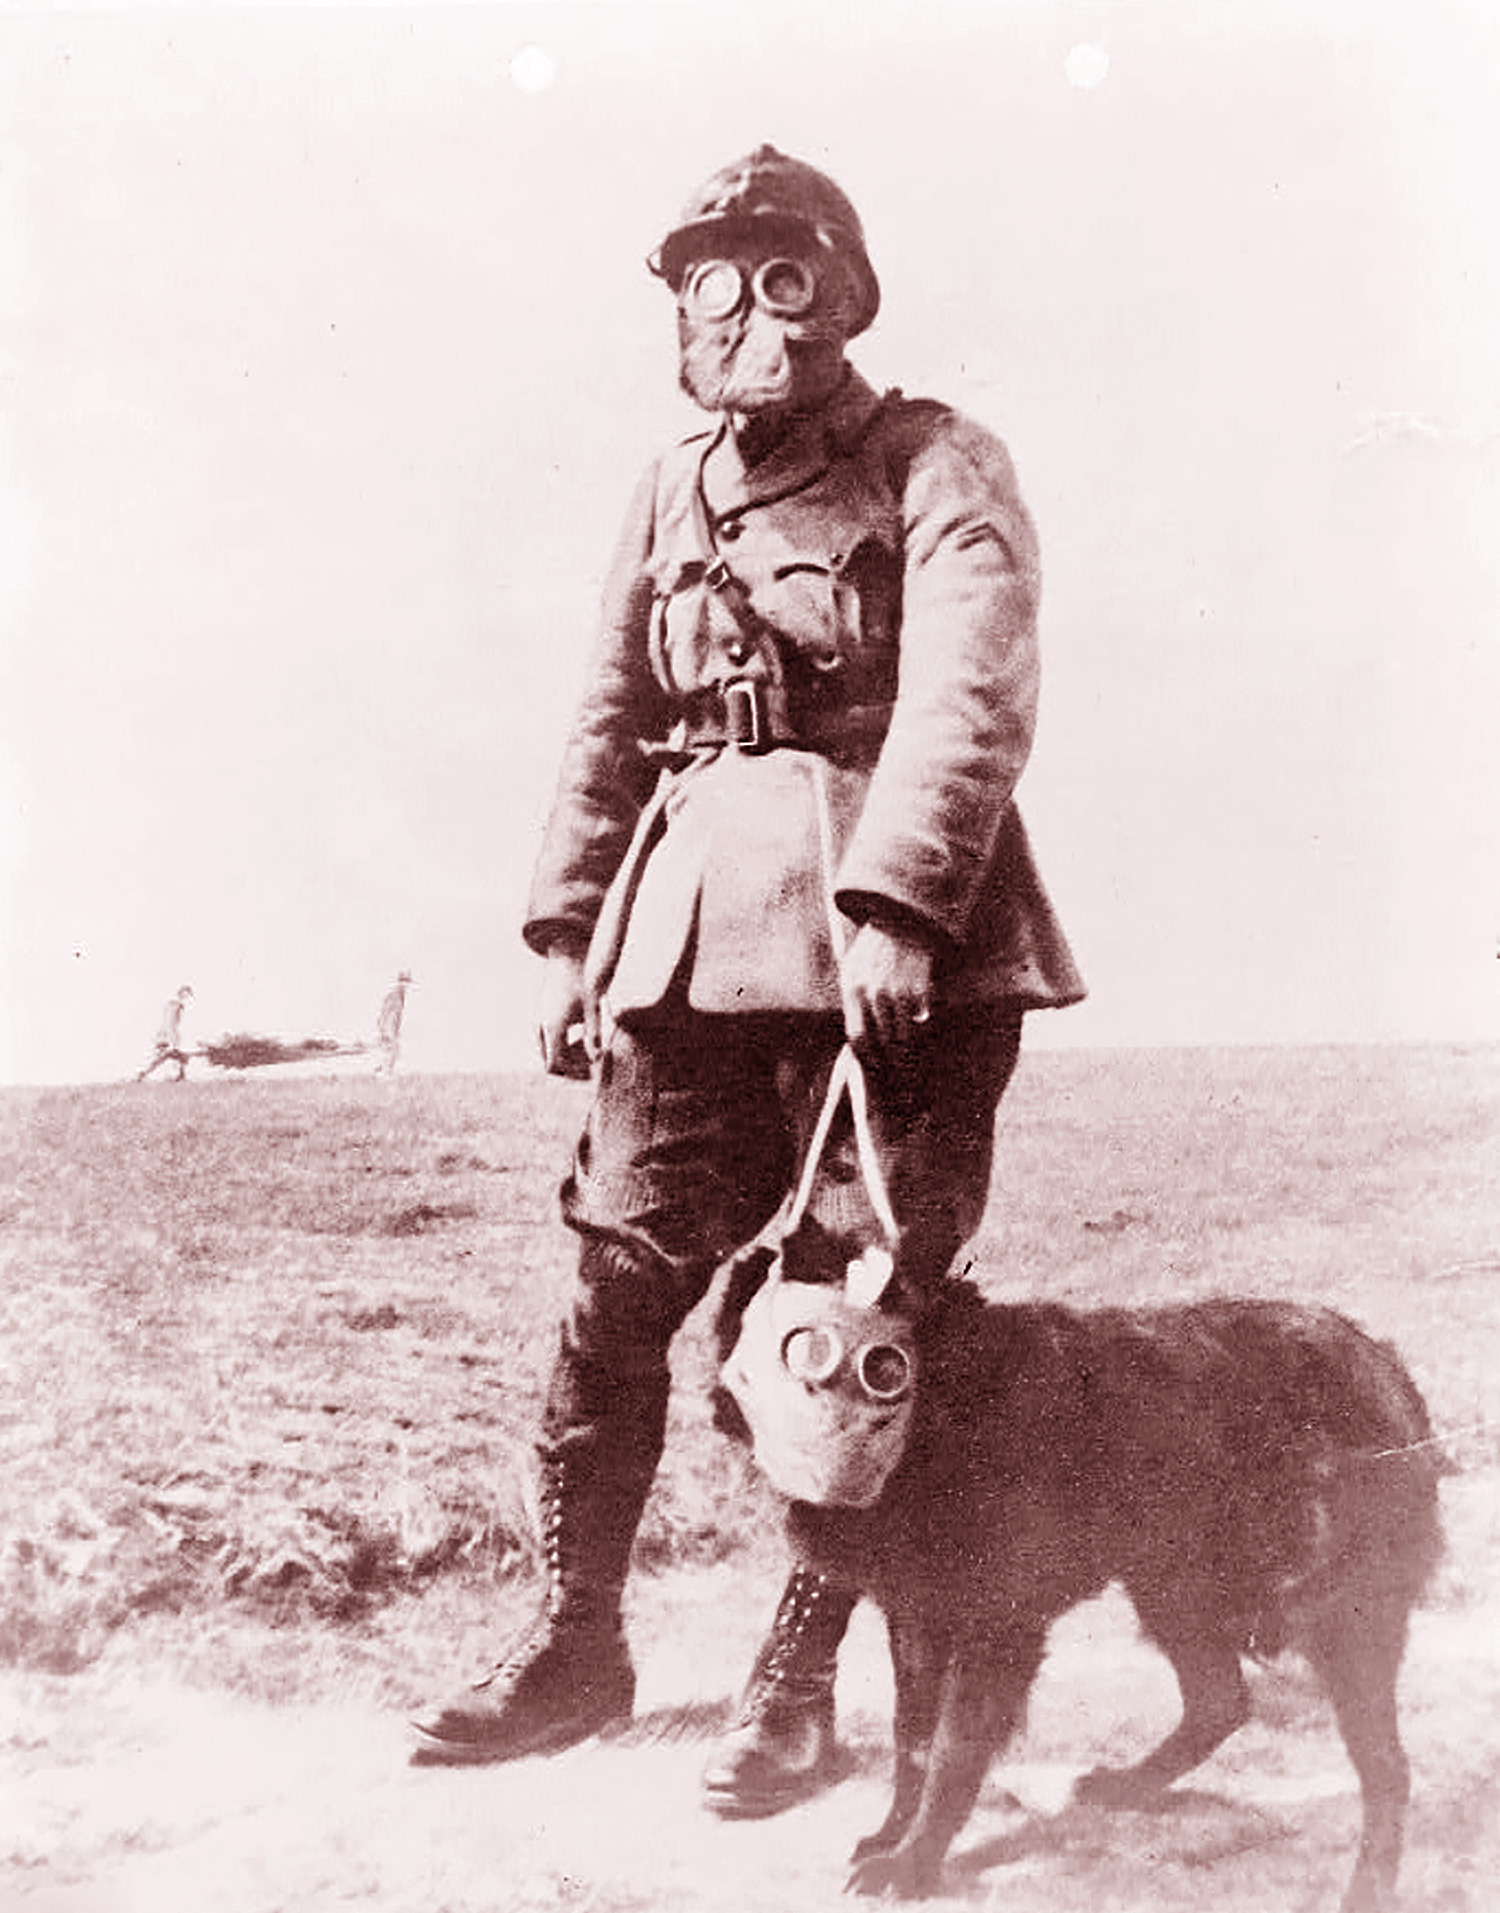 A vintage photo showing a French army sergeant and his dog wearing gas masks during World War 1